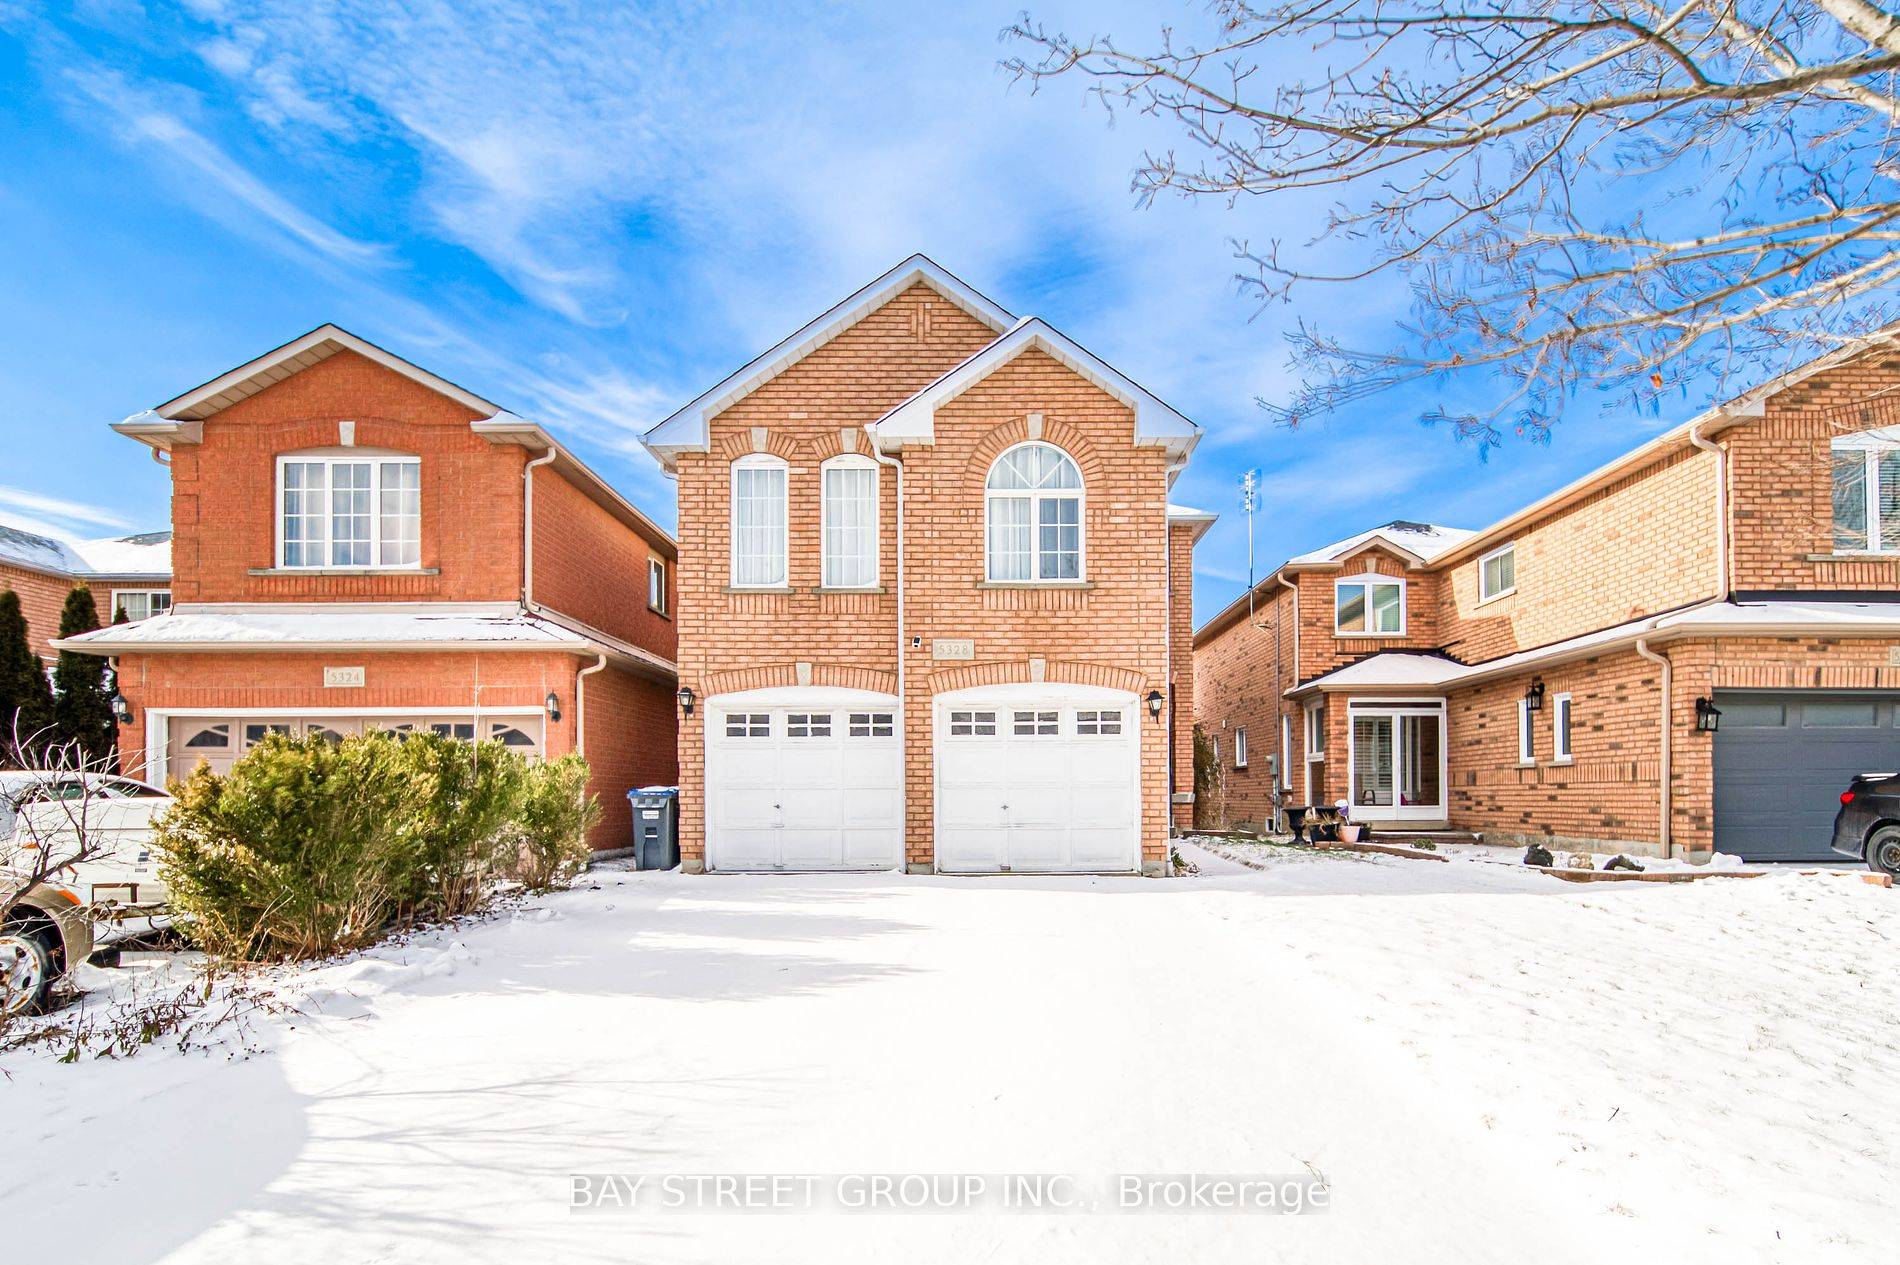 A Rare Find ! Modern Elegant Detached Home in the Heart of Mississauga with Tasteful Upgrades Throughout.